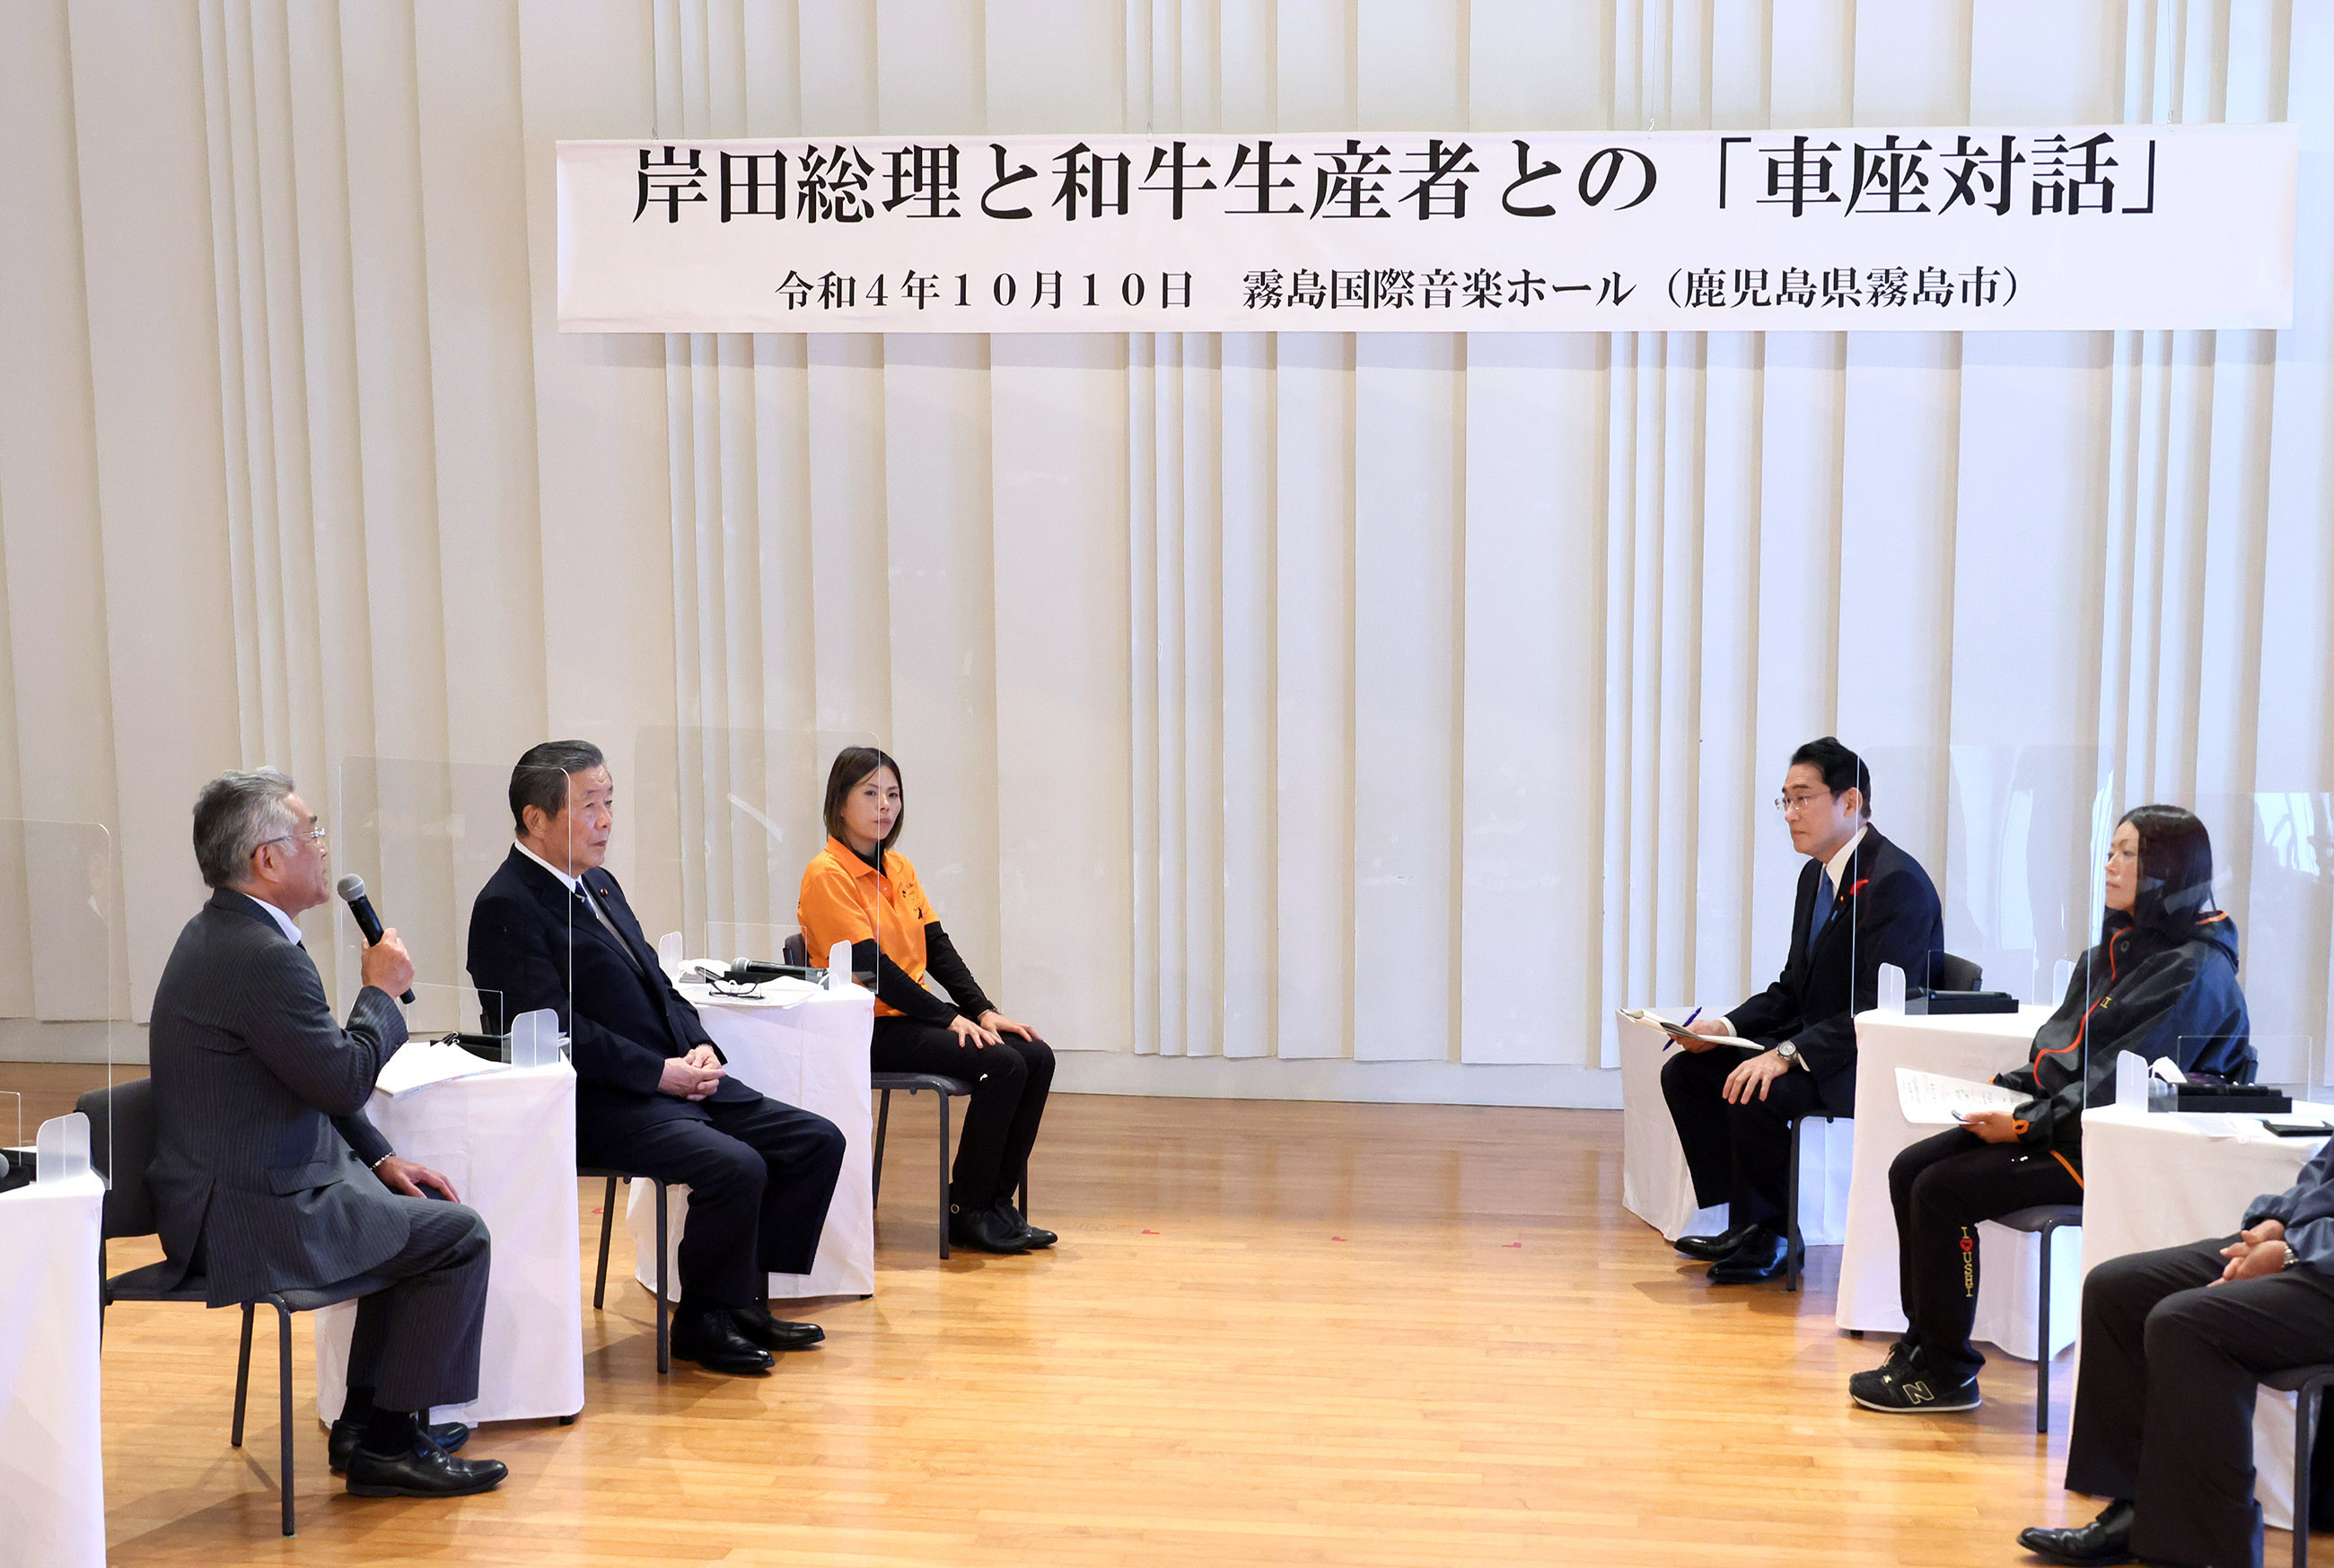 Photograph of the Prime Minister listening to other participants at a roundtable talk (4)